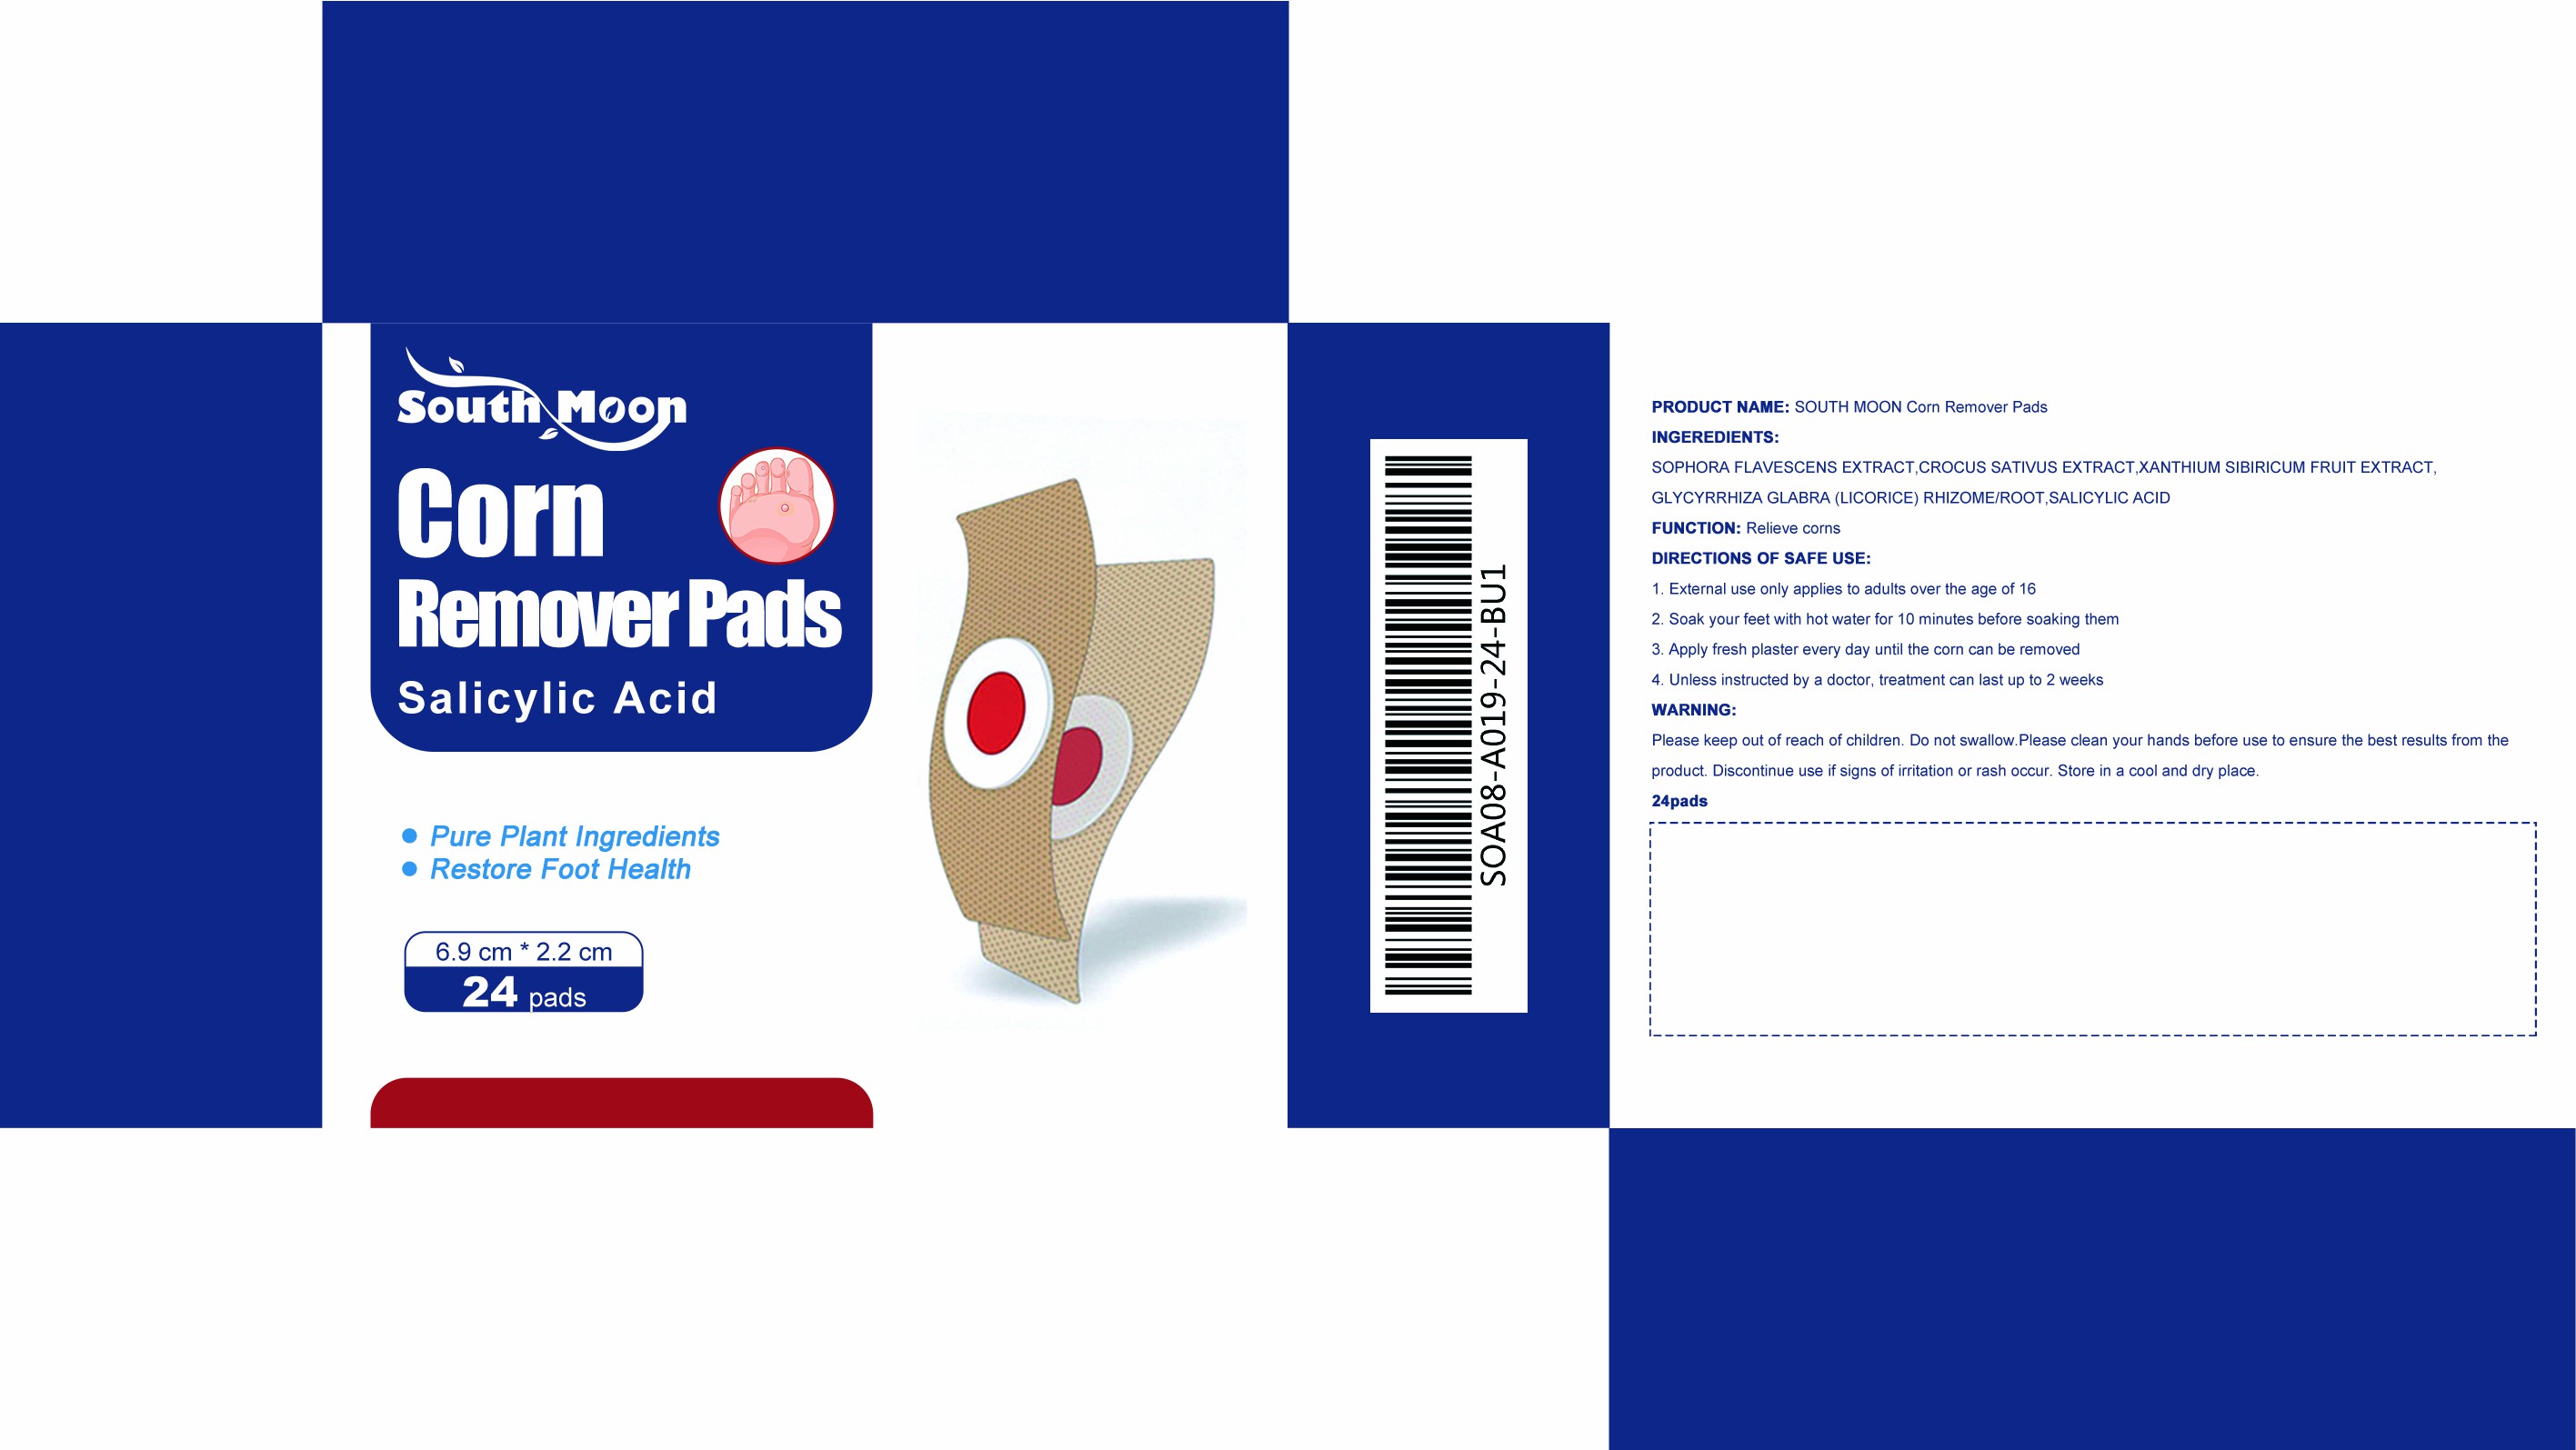 Package label